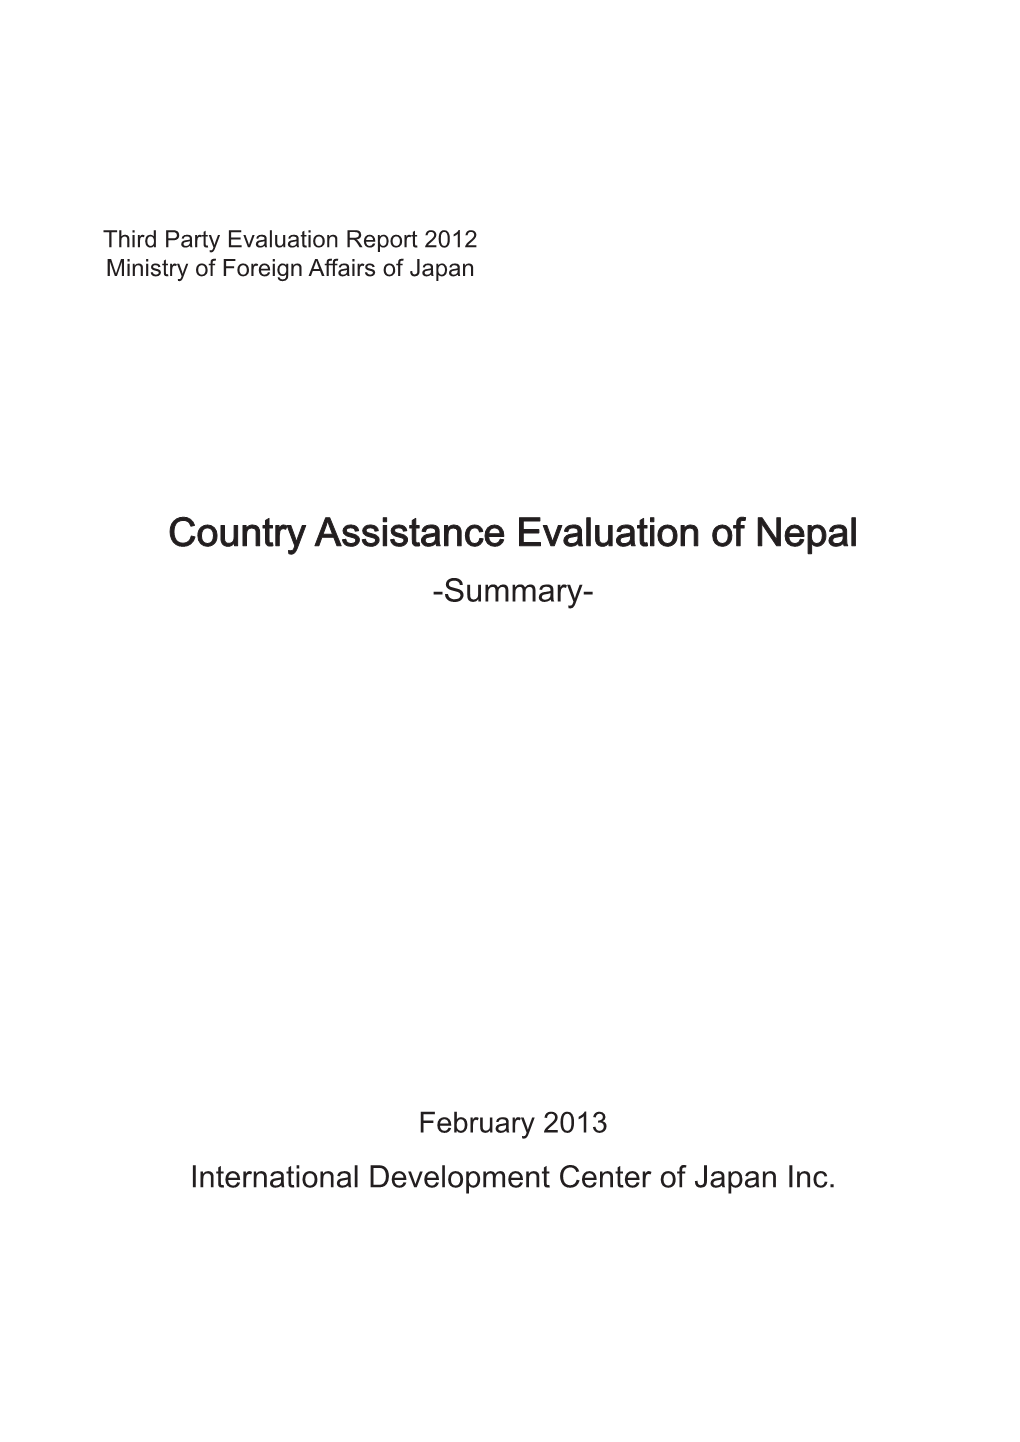 Country Assistance Evaluation of Nepal -Summary